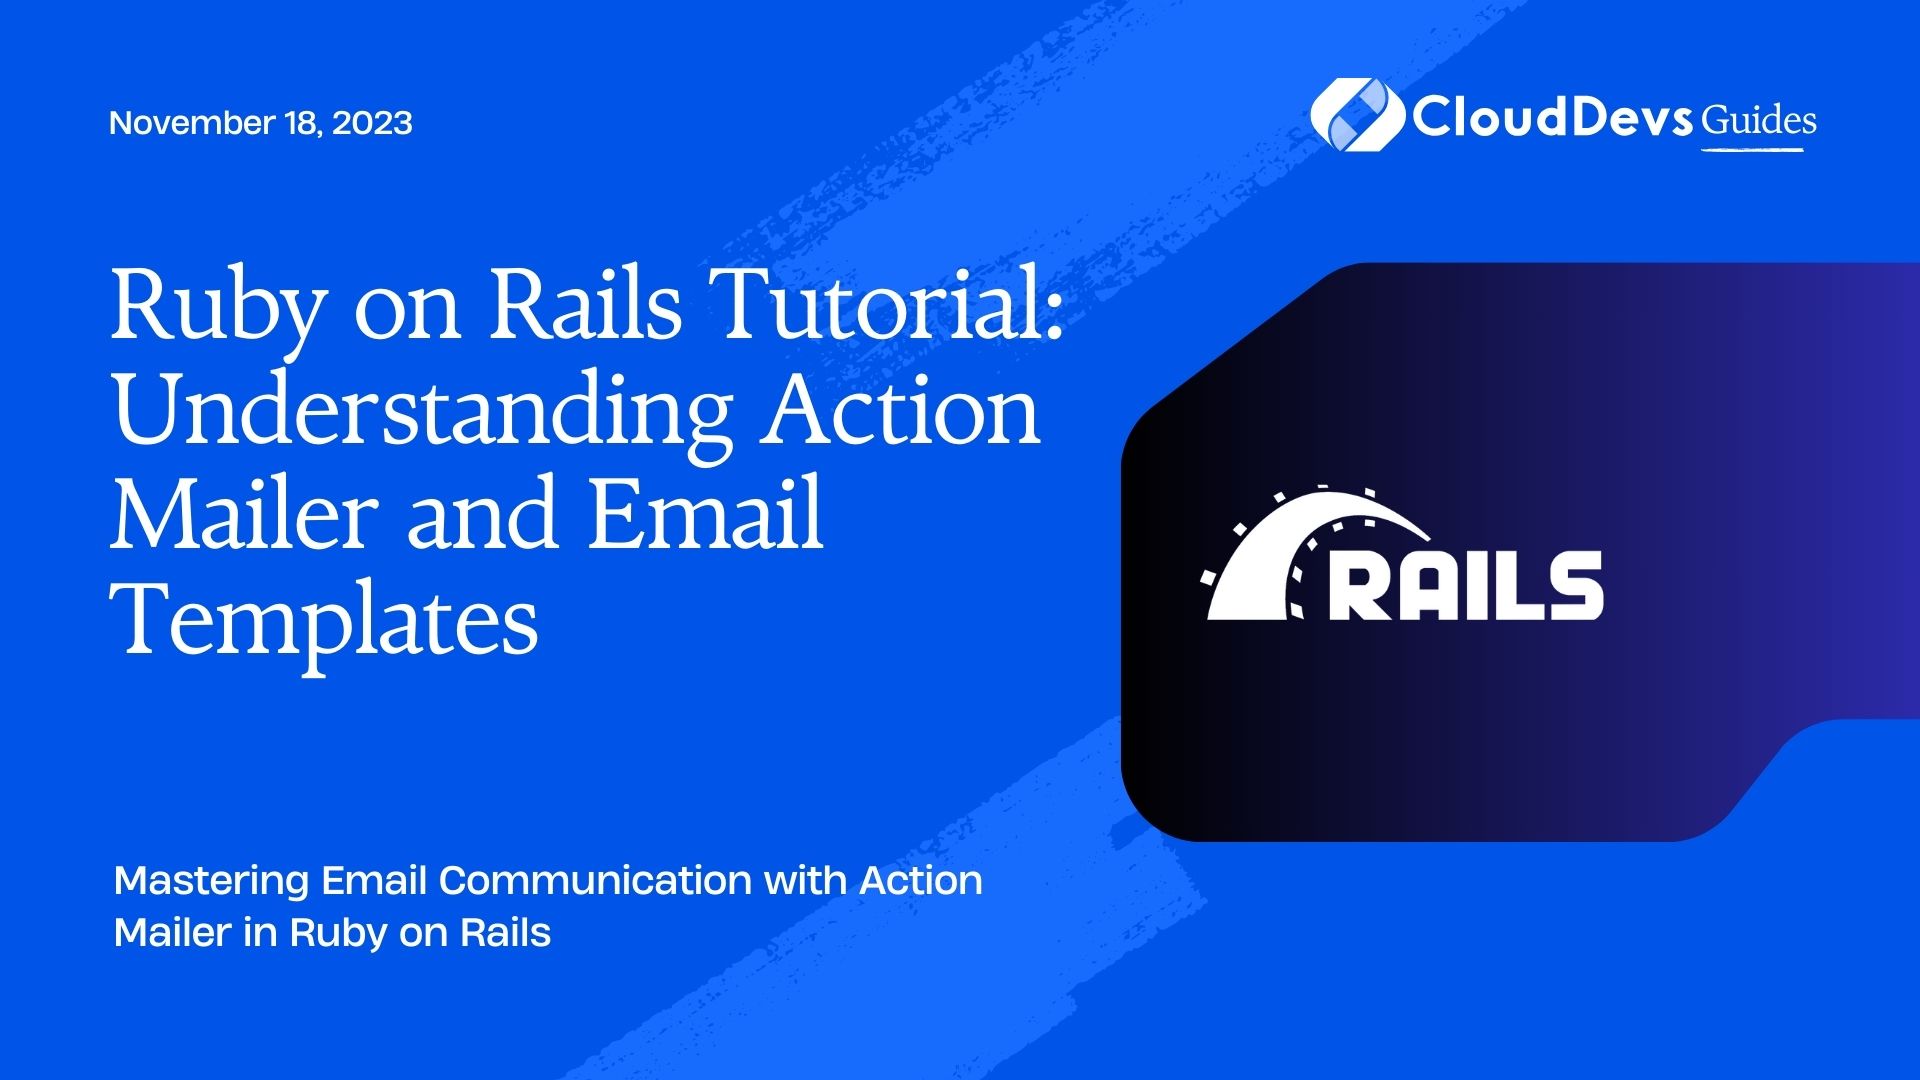 Ruby on Rails Tutorial: Understanding Action Mailer and Email Templates